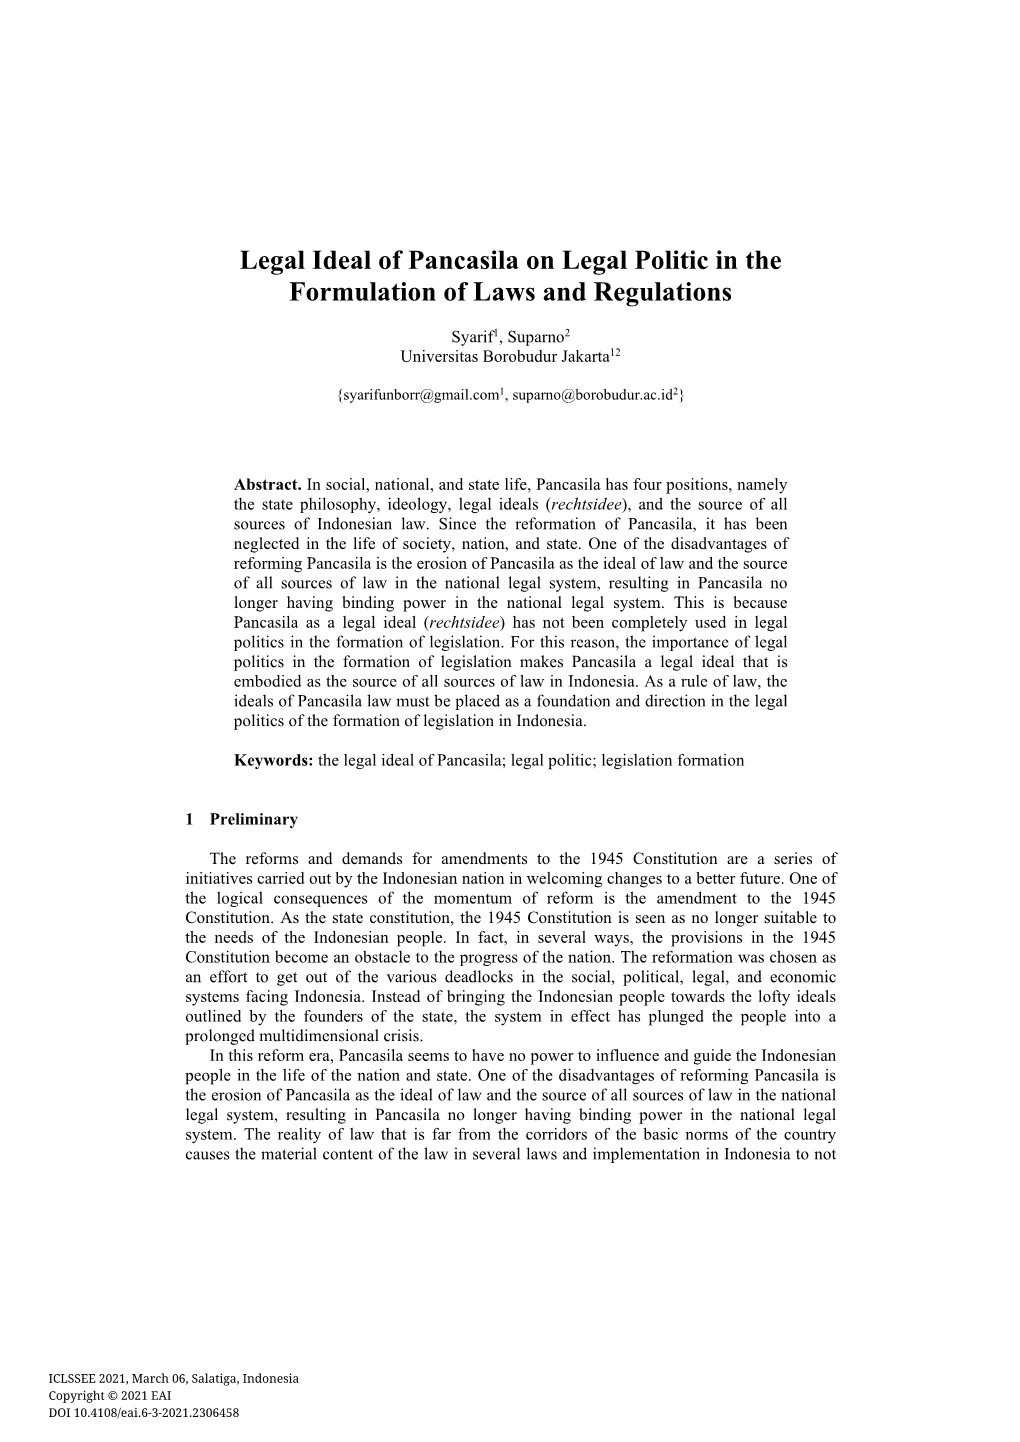 Legal Ideal of Pancasila on Legal Politic in the Formulation of Laws and Regulations